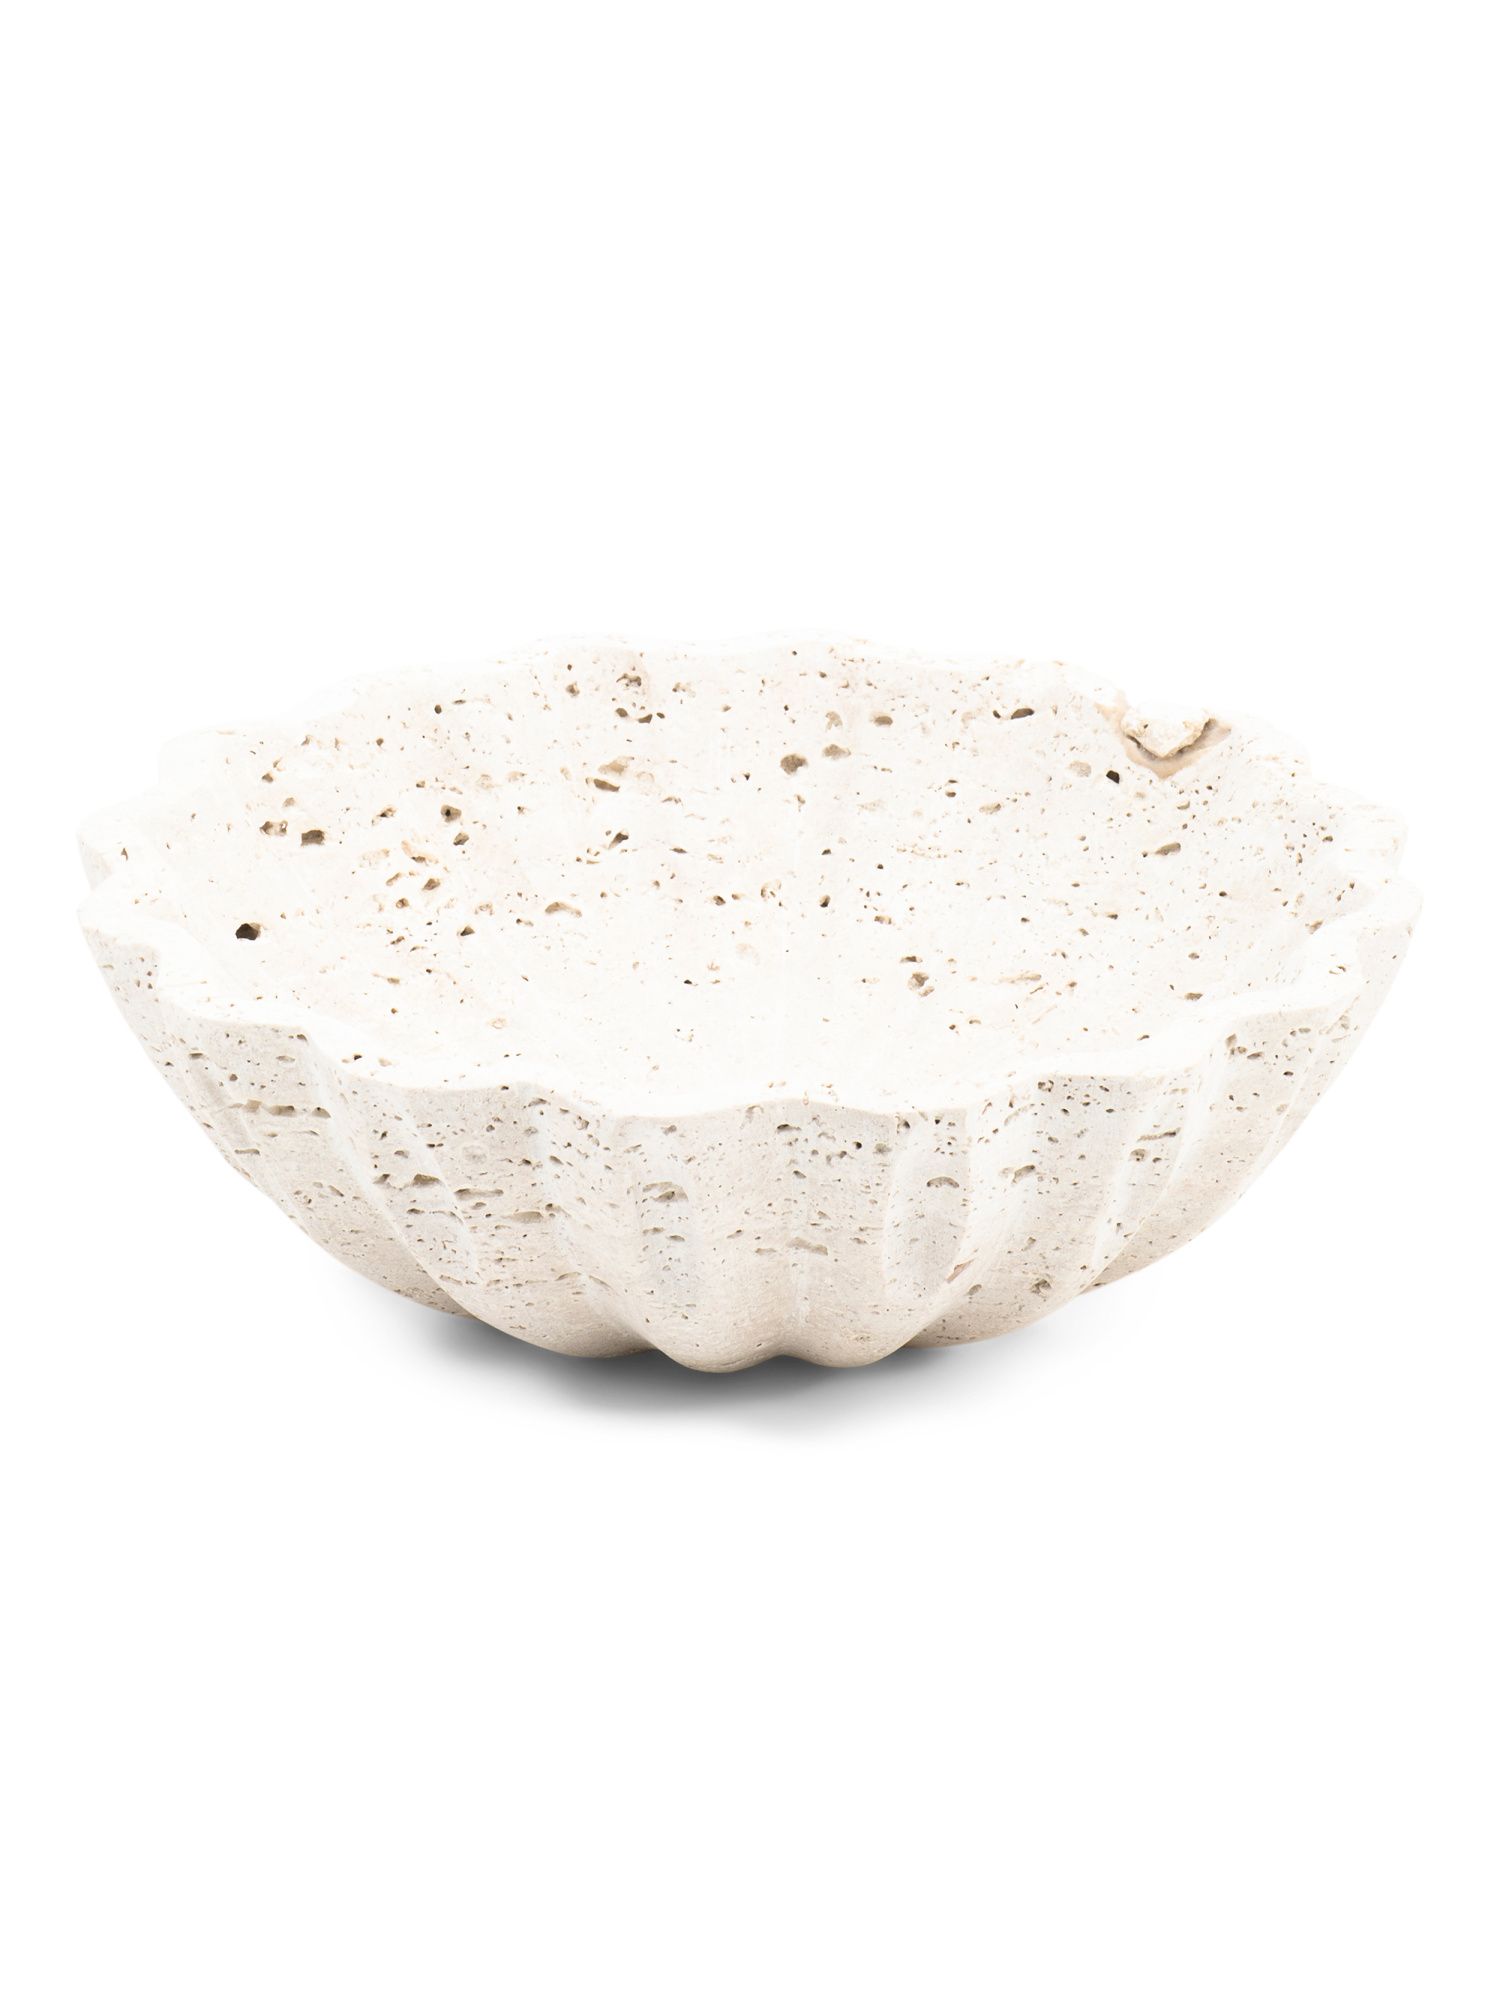 INTERNATIONAL BRASS HOUSE
10in Fluted Travertine Stone Bowl

$39.99
Compare At  $64 Help
 | Marshalls